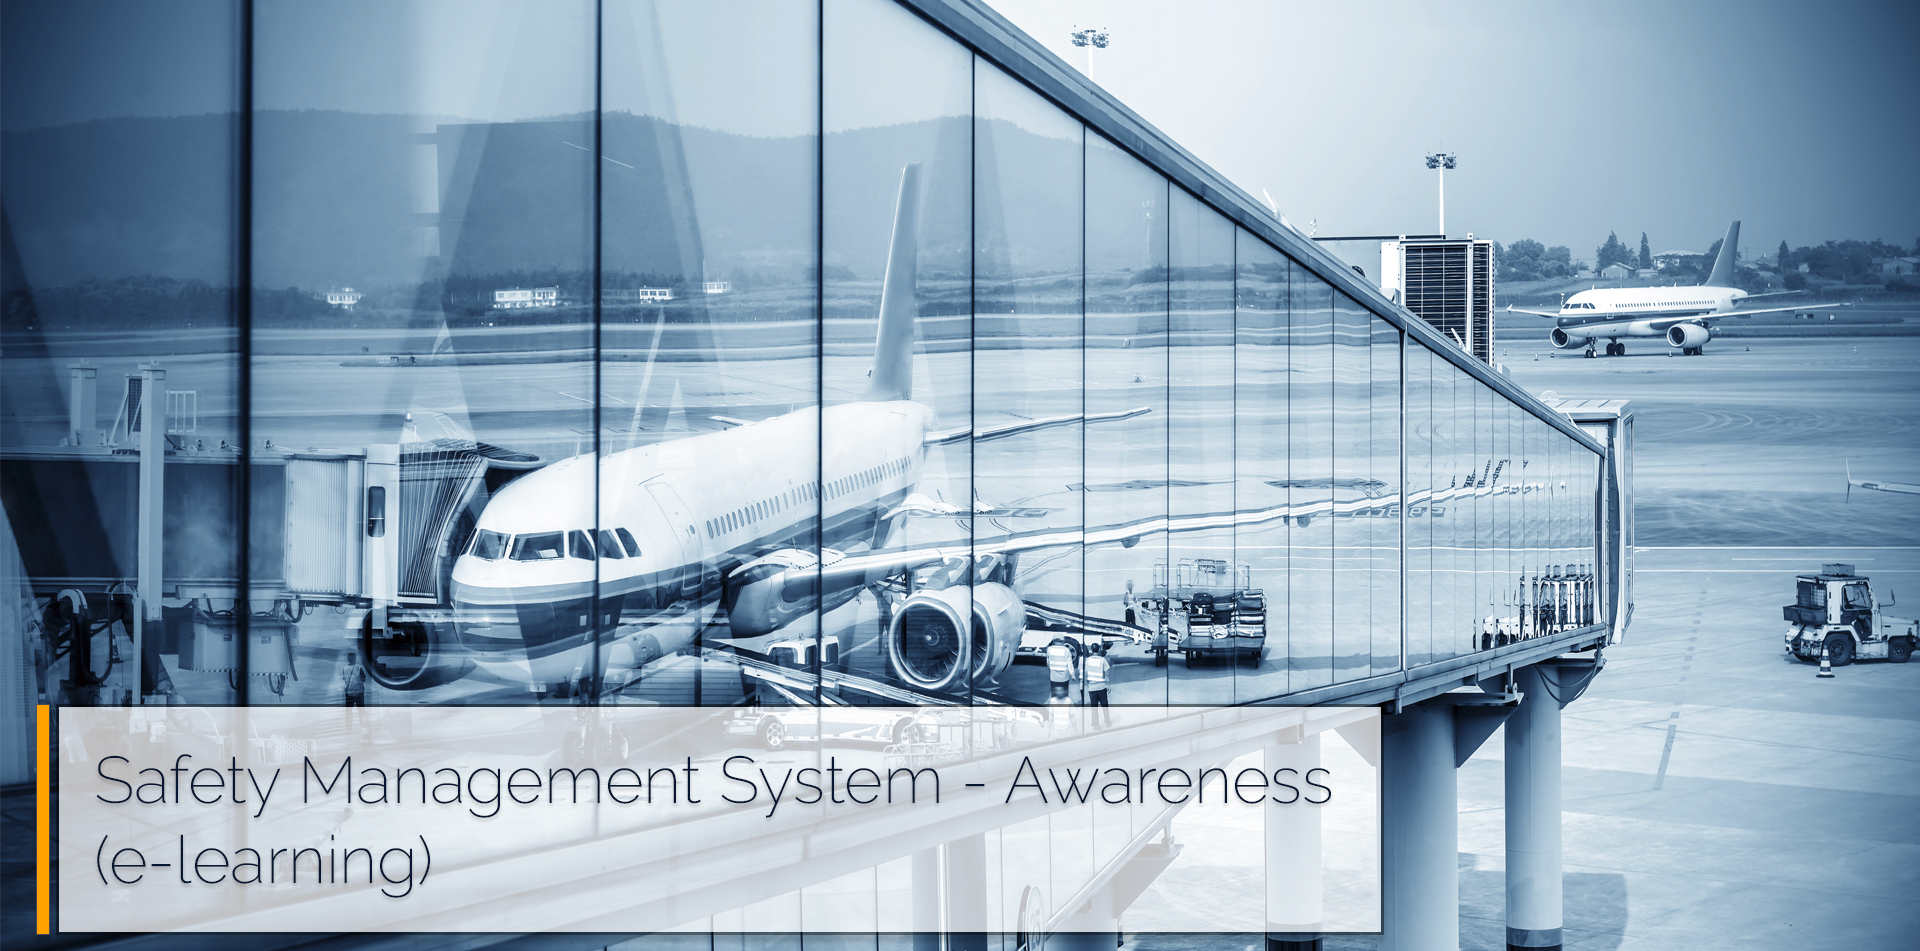 Safety Management System - Awareness (e-learning)